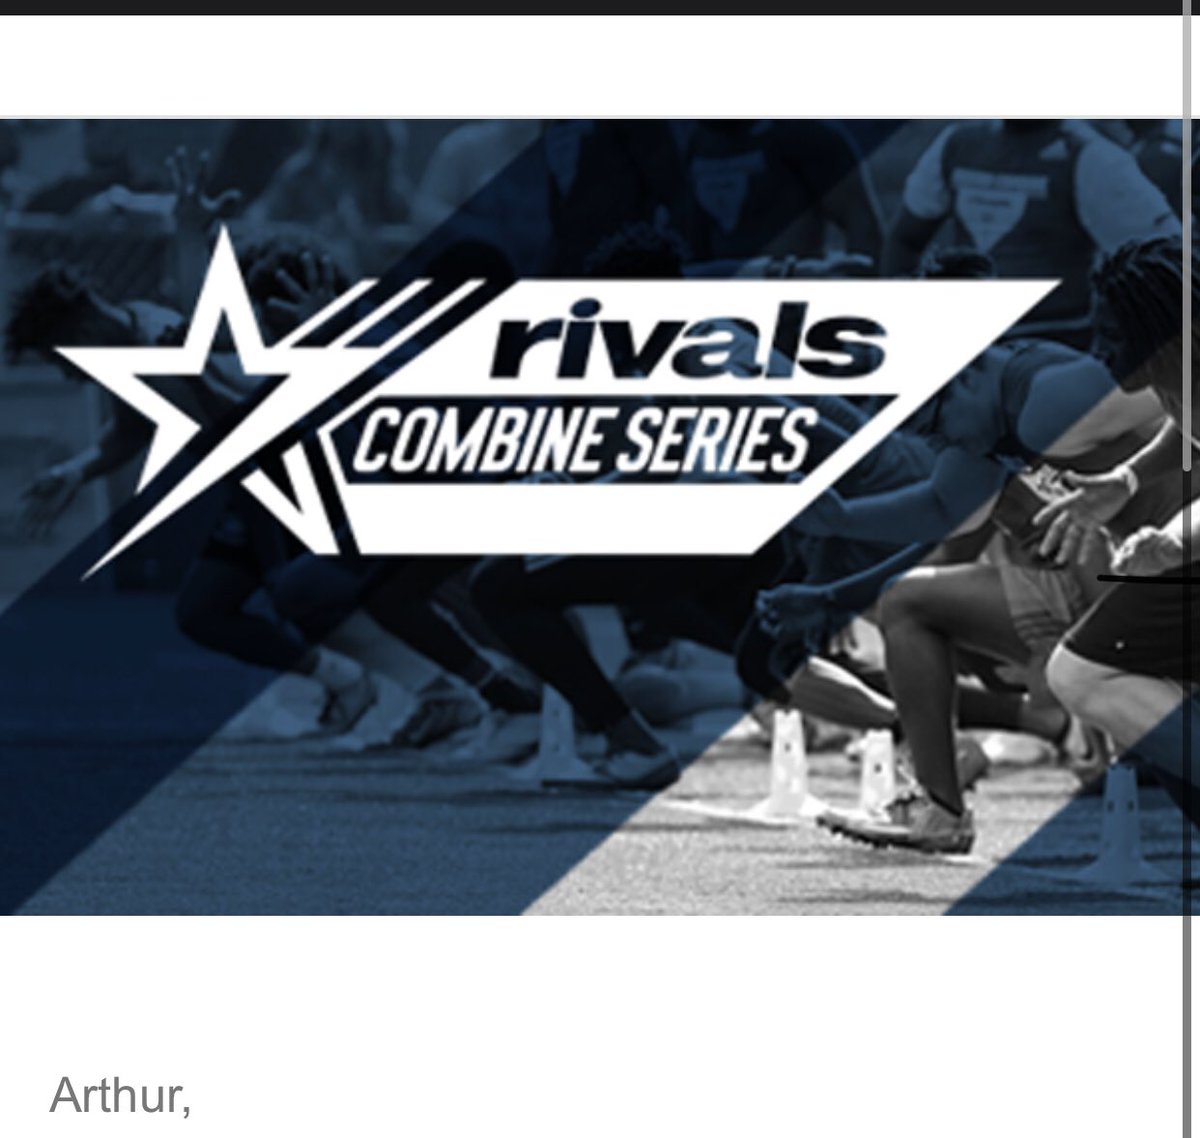 Blessed to have the opportunity to compete in the 2020 @Rivals combine series @Coach_JoeyMoss @truebuzzgroup